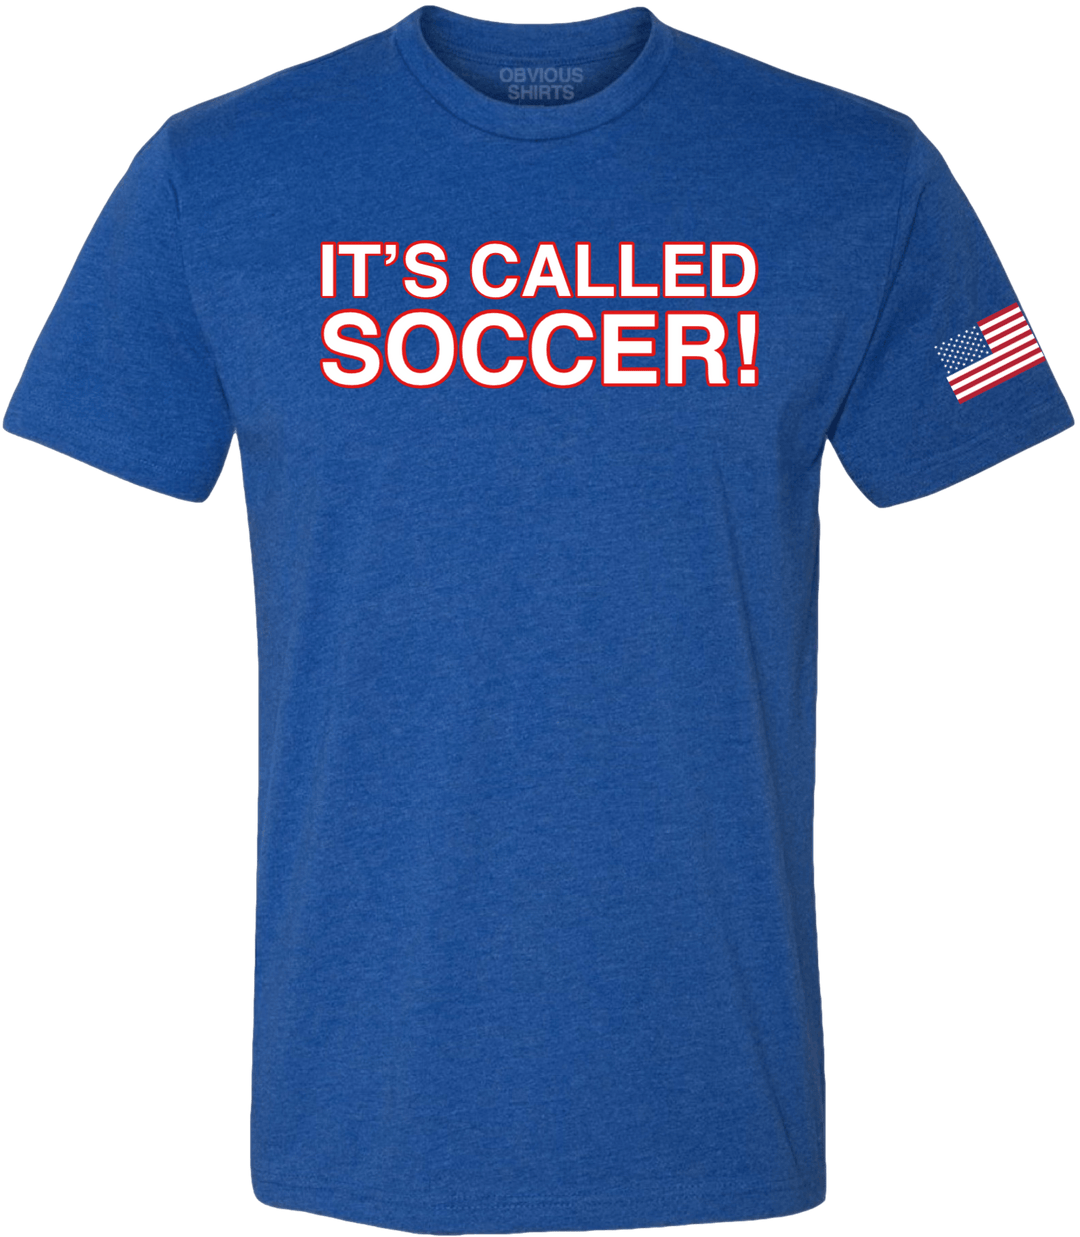 IT'S CALLED SOCCER! - OBVIOUS SHIRTS